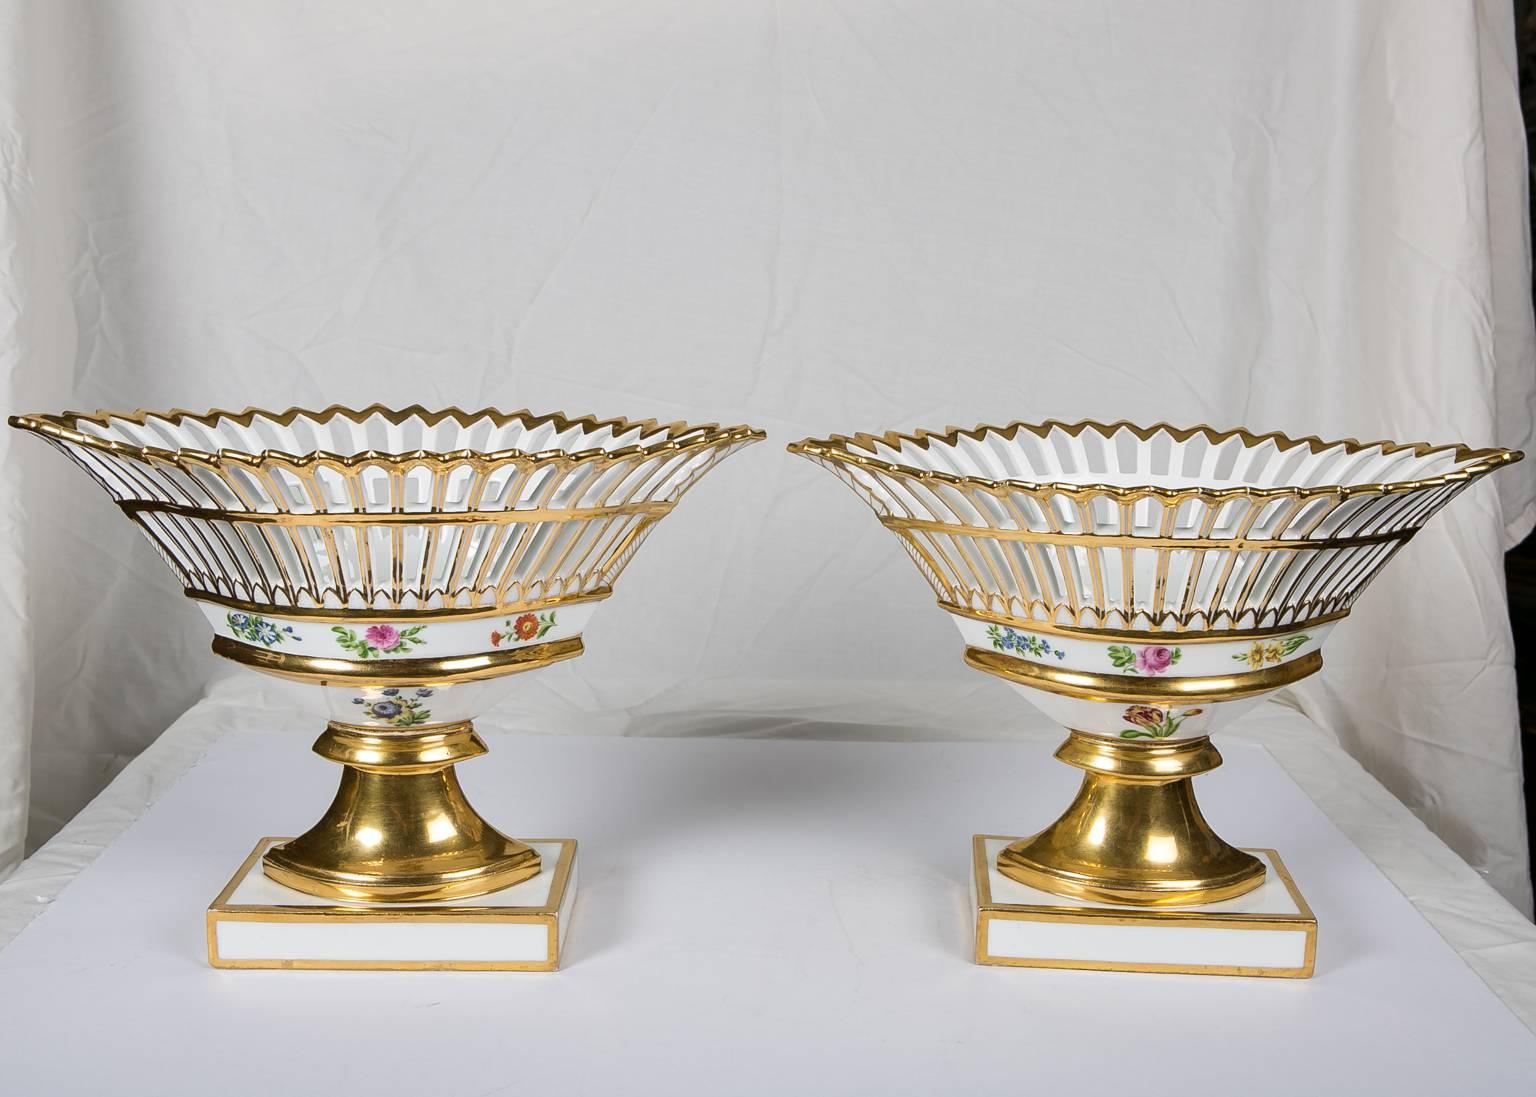 Pair French Gilded Porcelain Baskets 'Corbeilles' Made Mid-19th Century For Sale 5